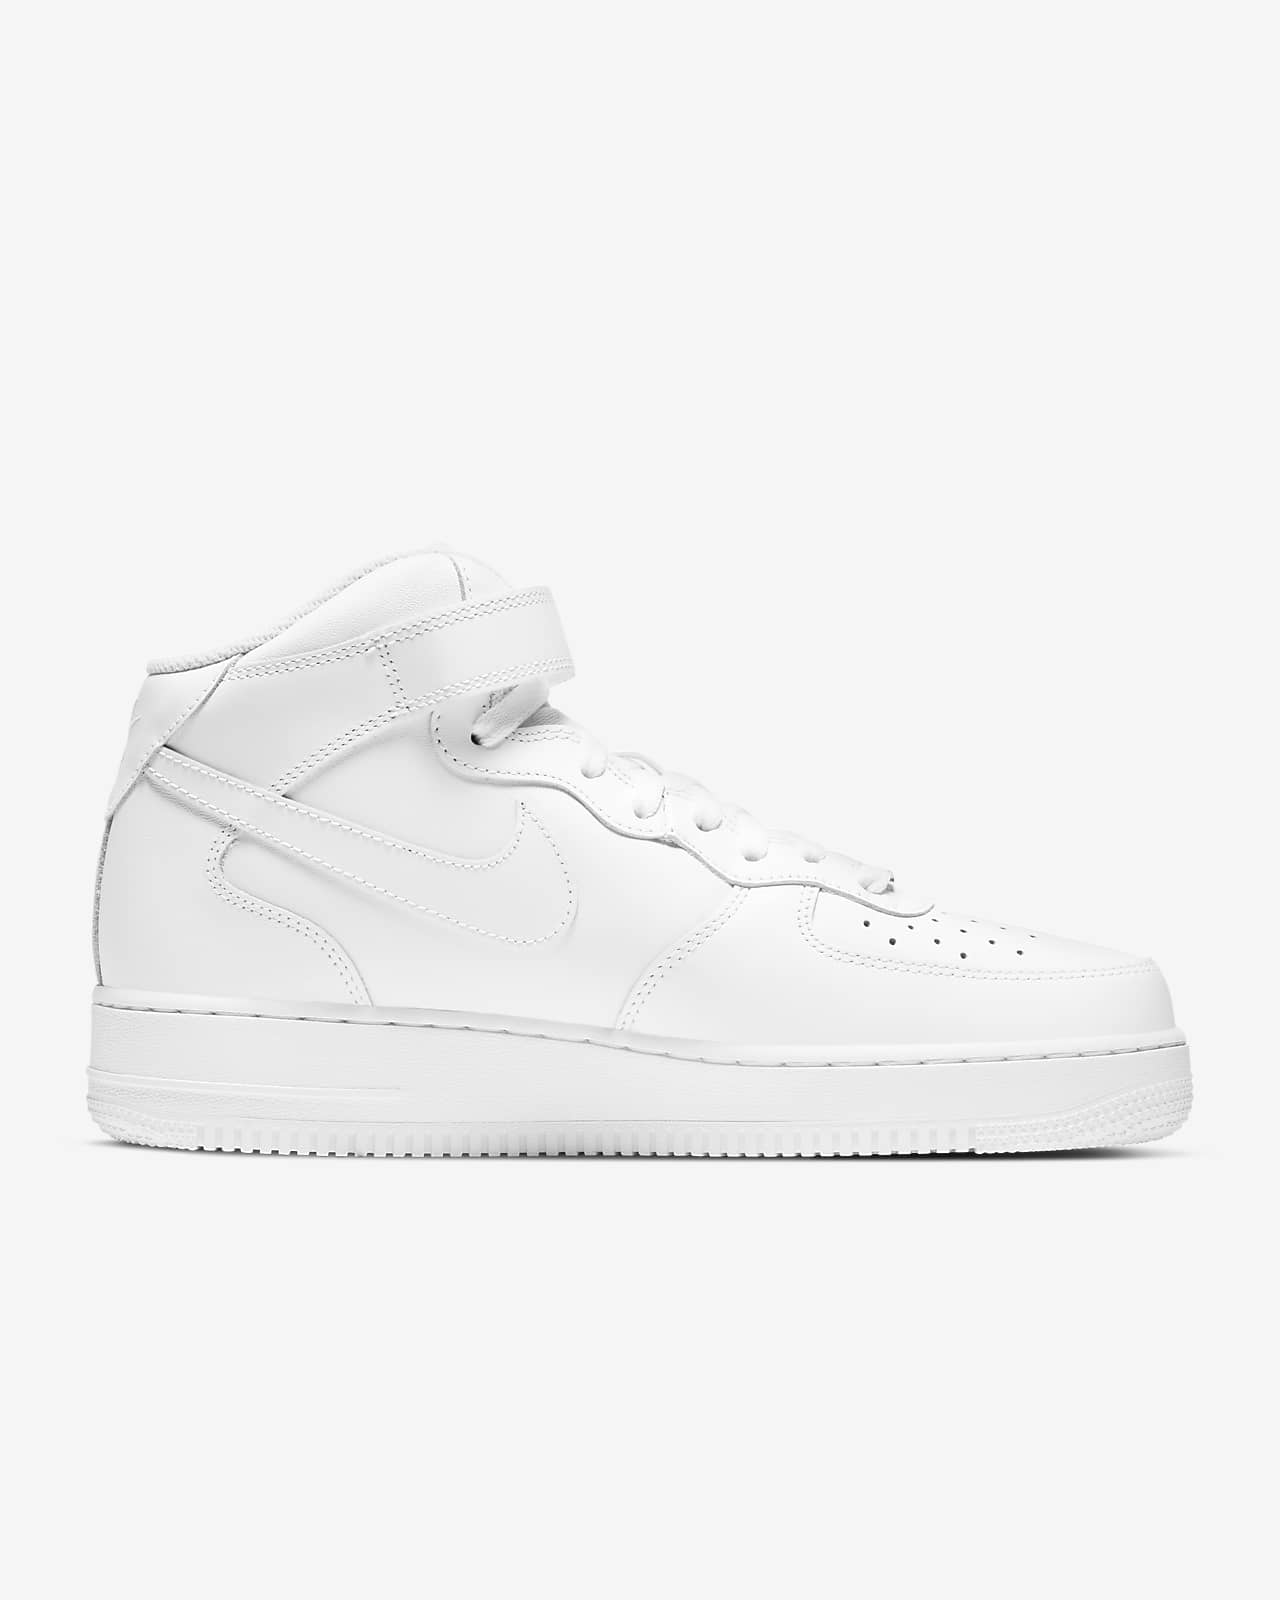 nike air force one mid 07 men's shoe